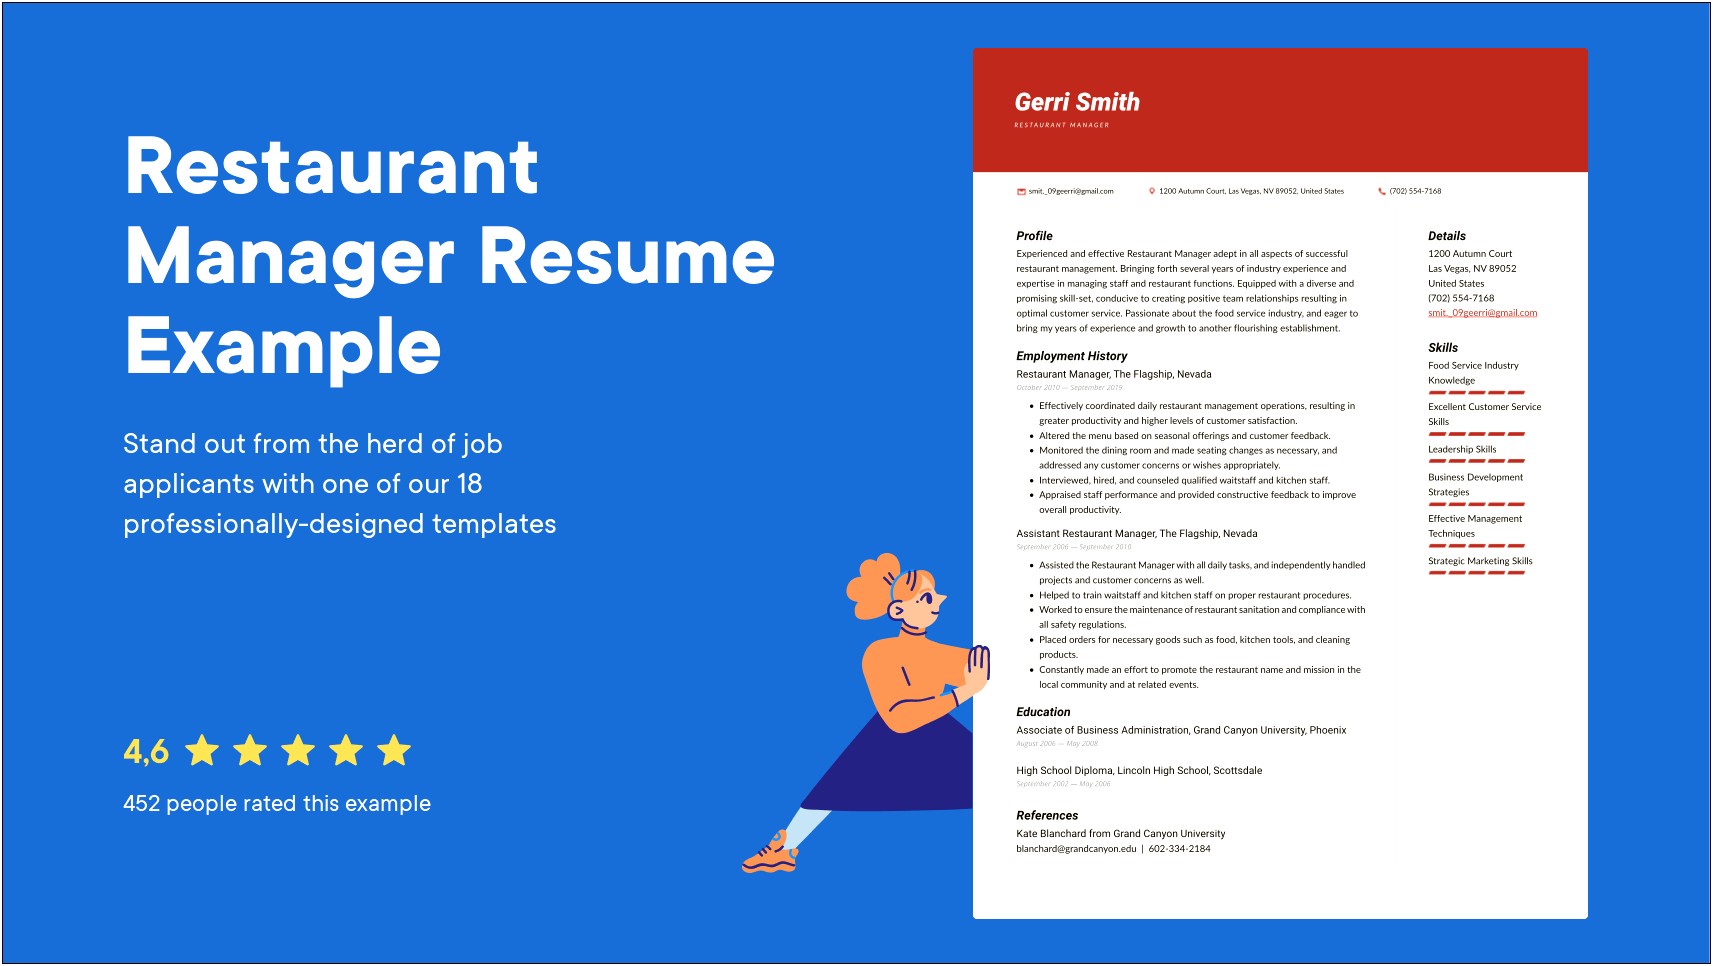 Restaurant Manager Resume Objective Example